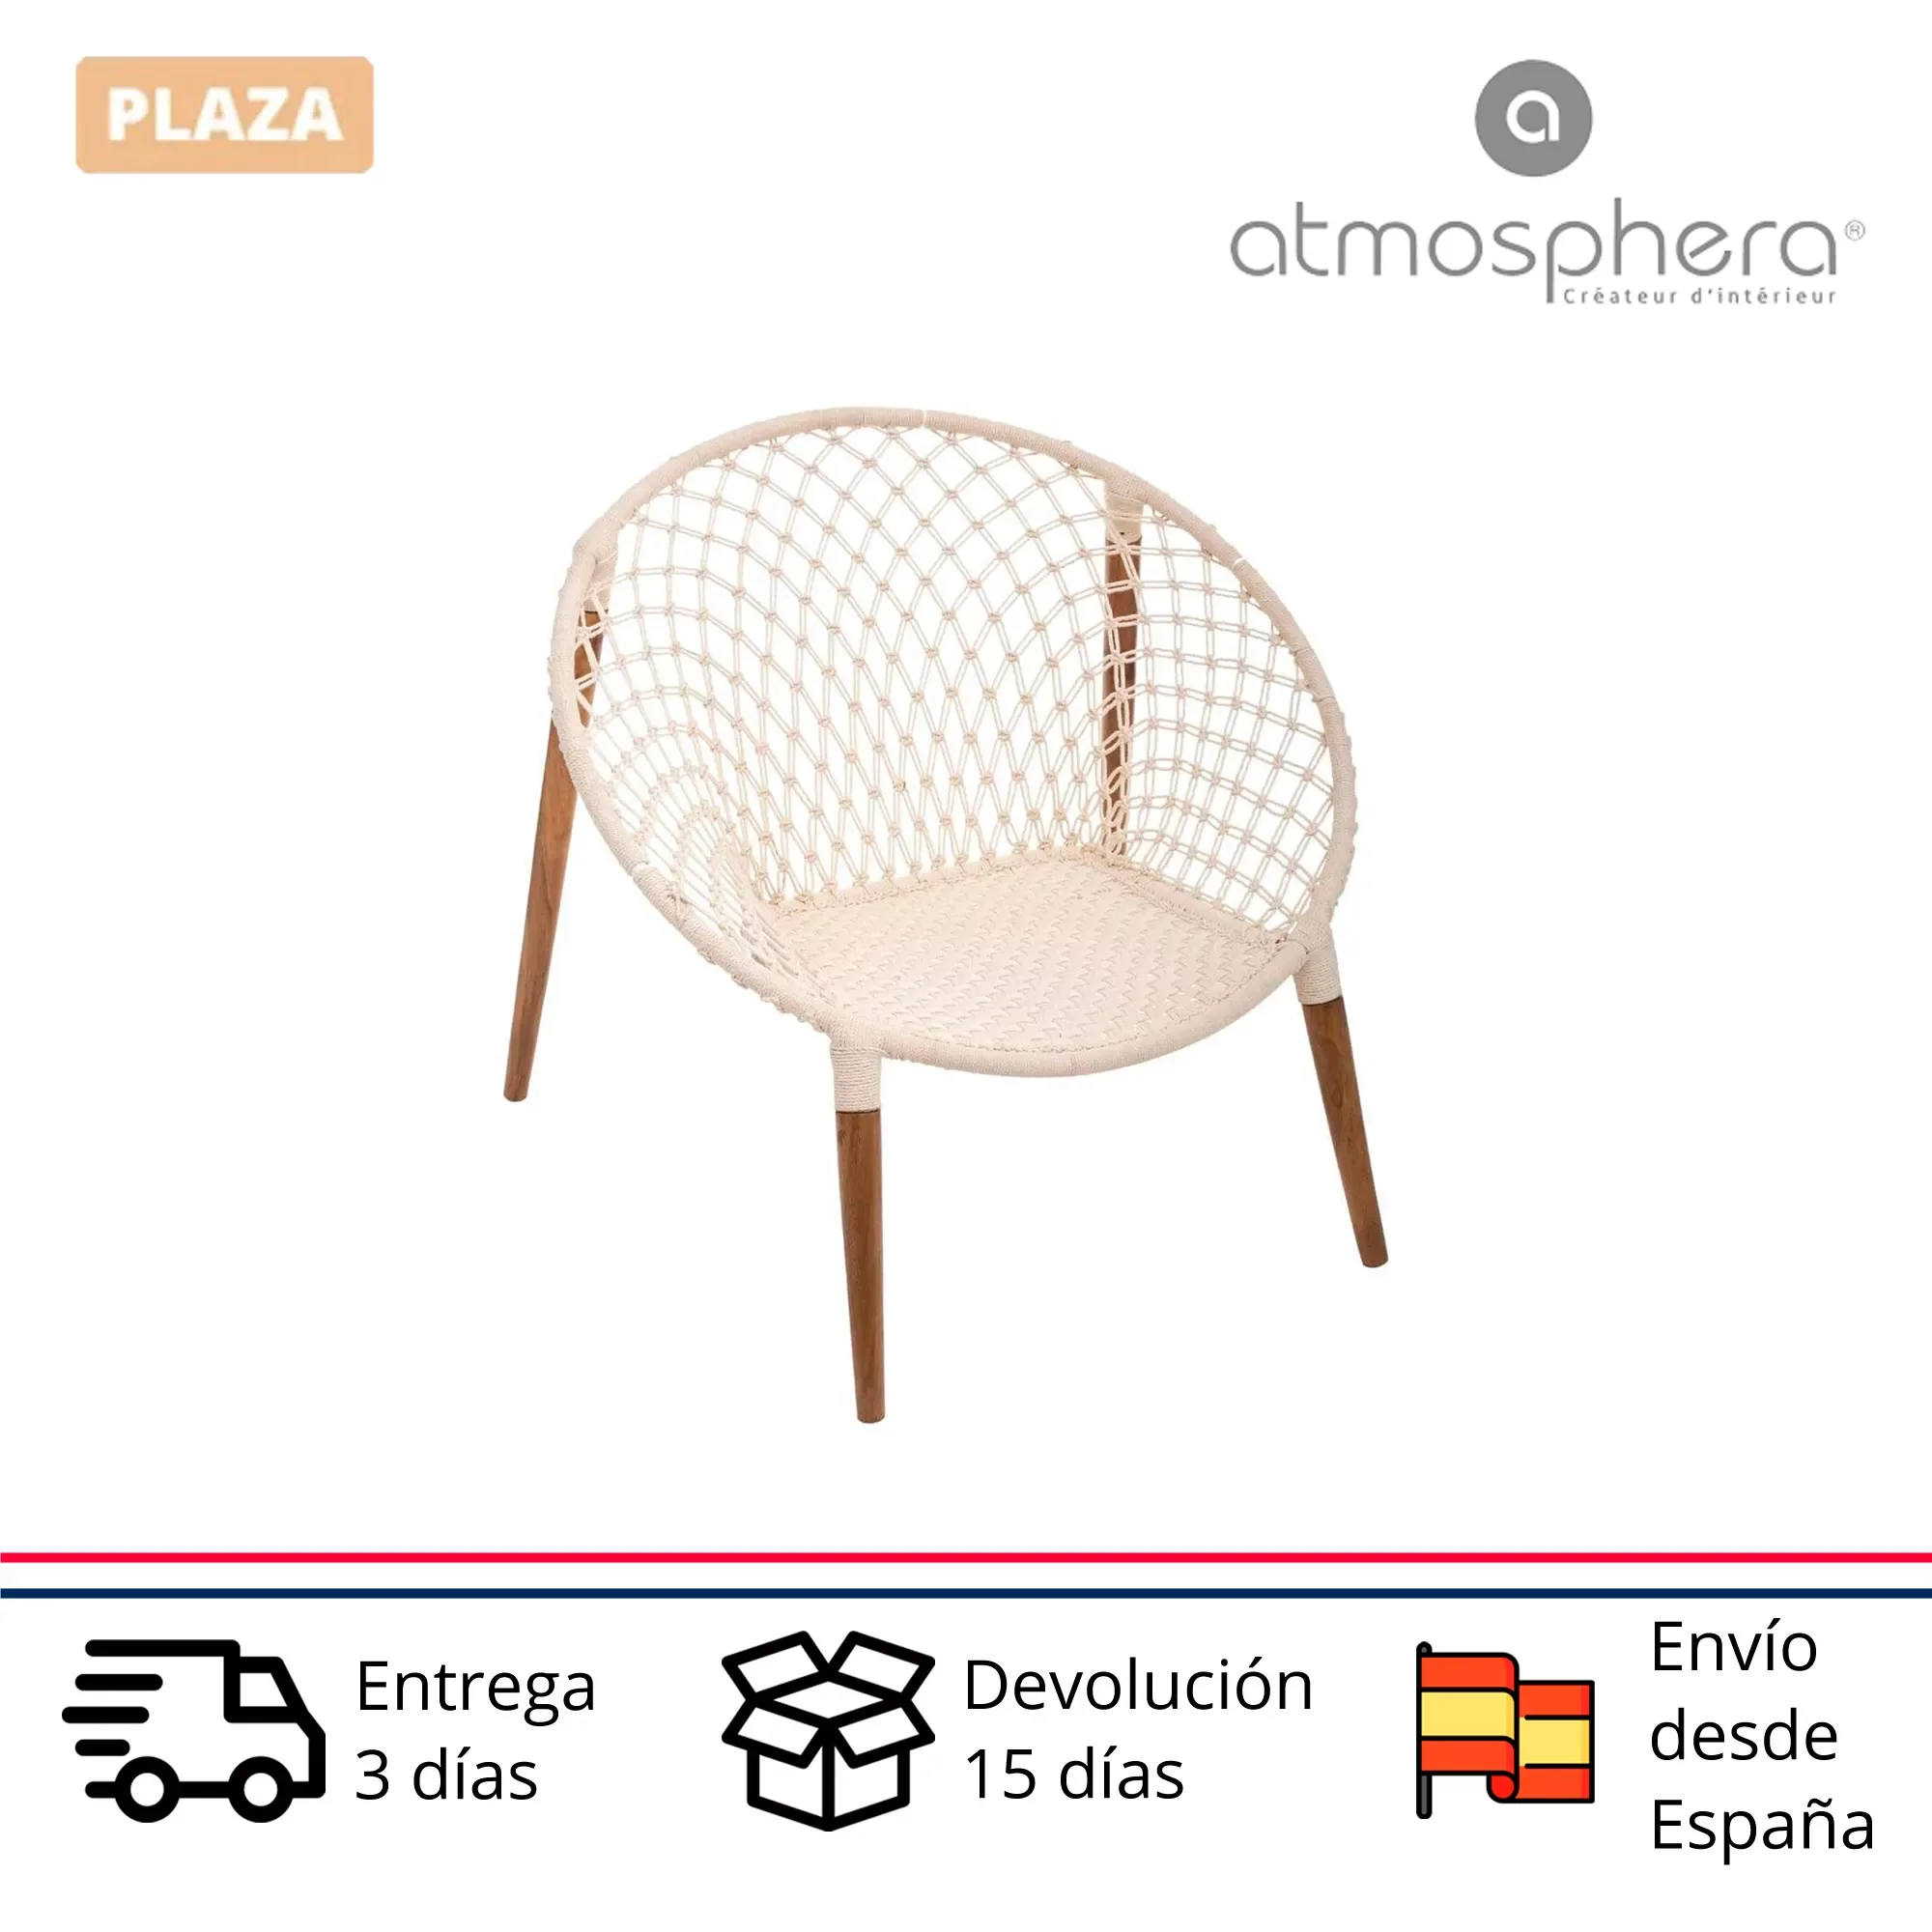 

armchair braided in white with a round Net-shaped made of mango wood and cotton